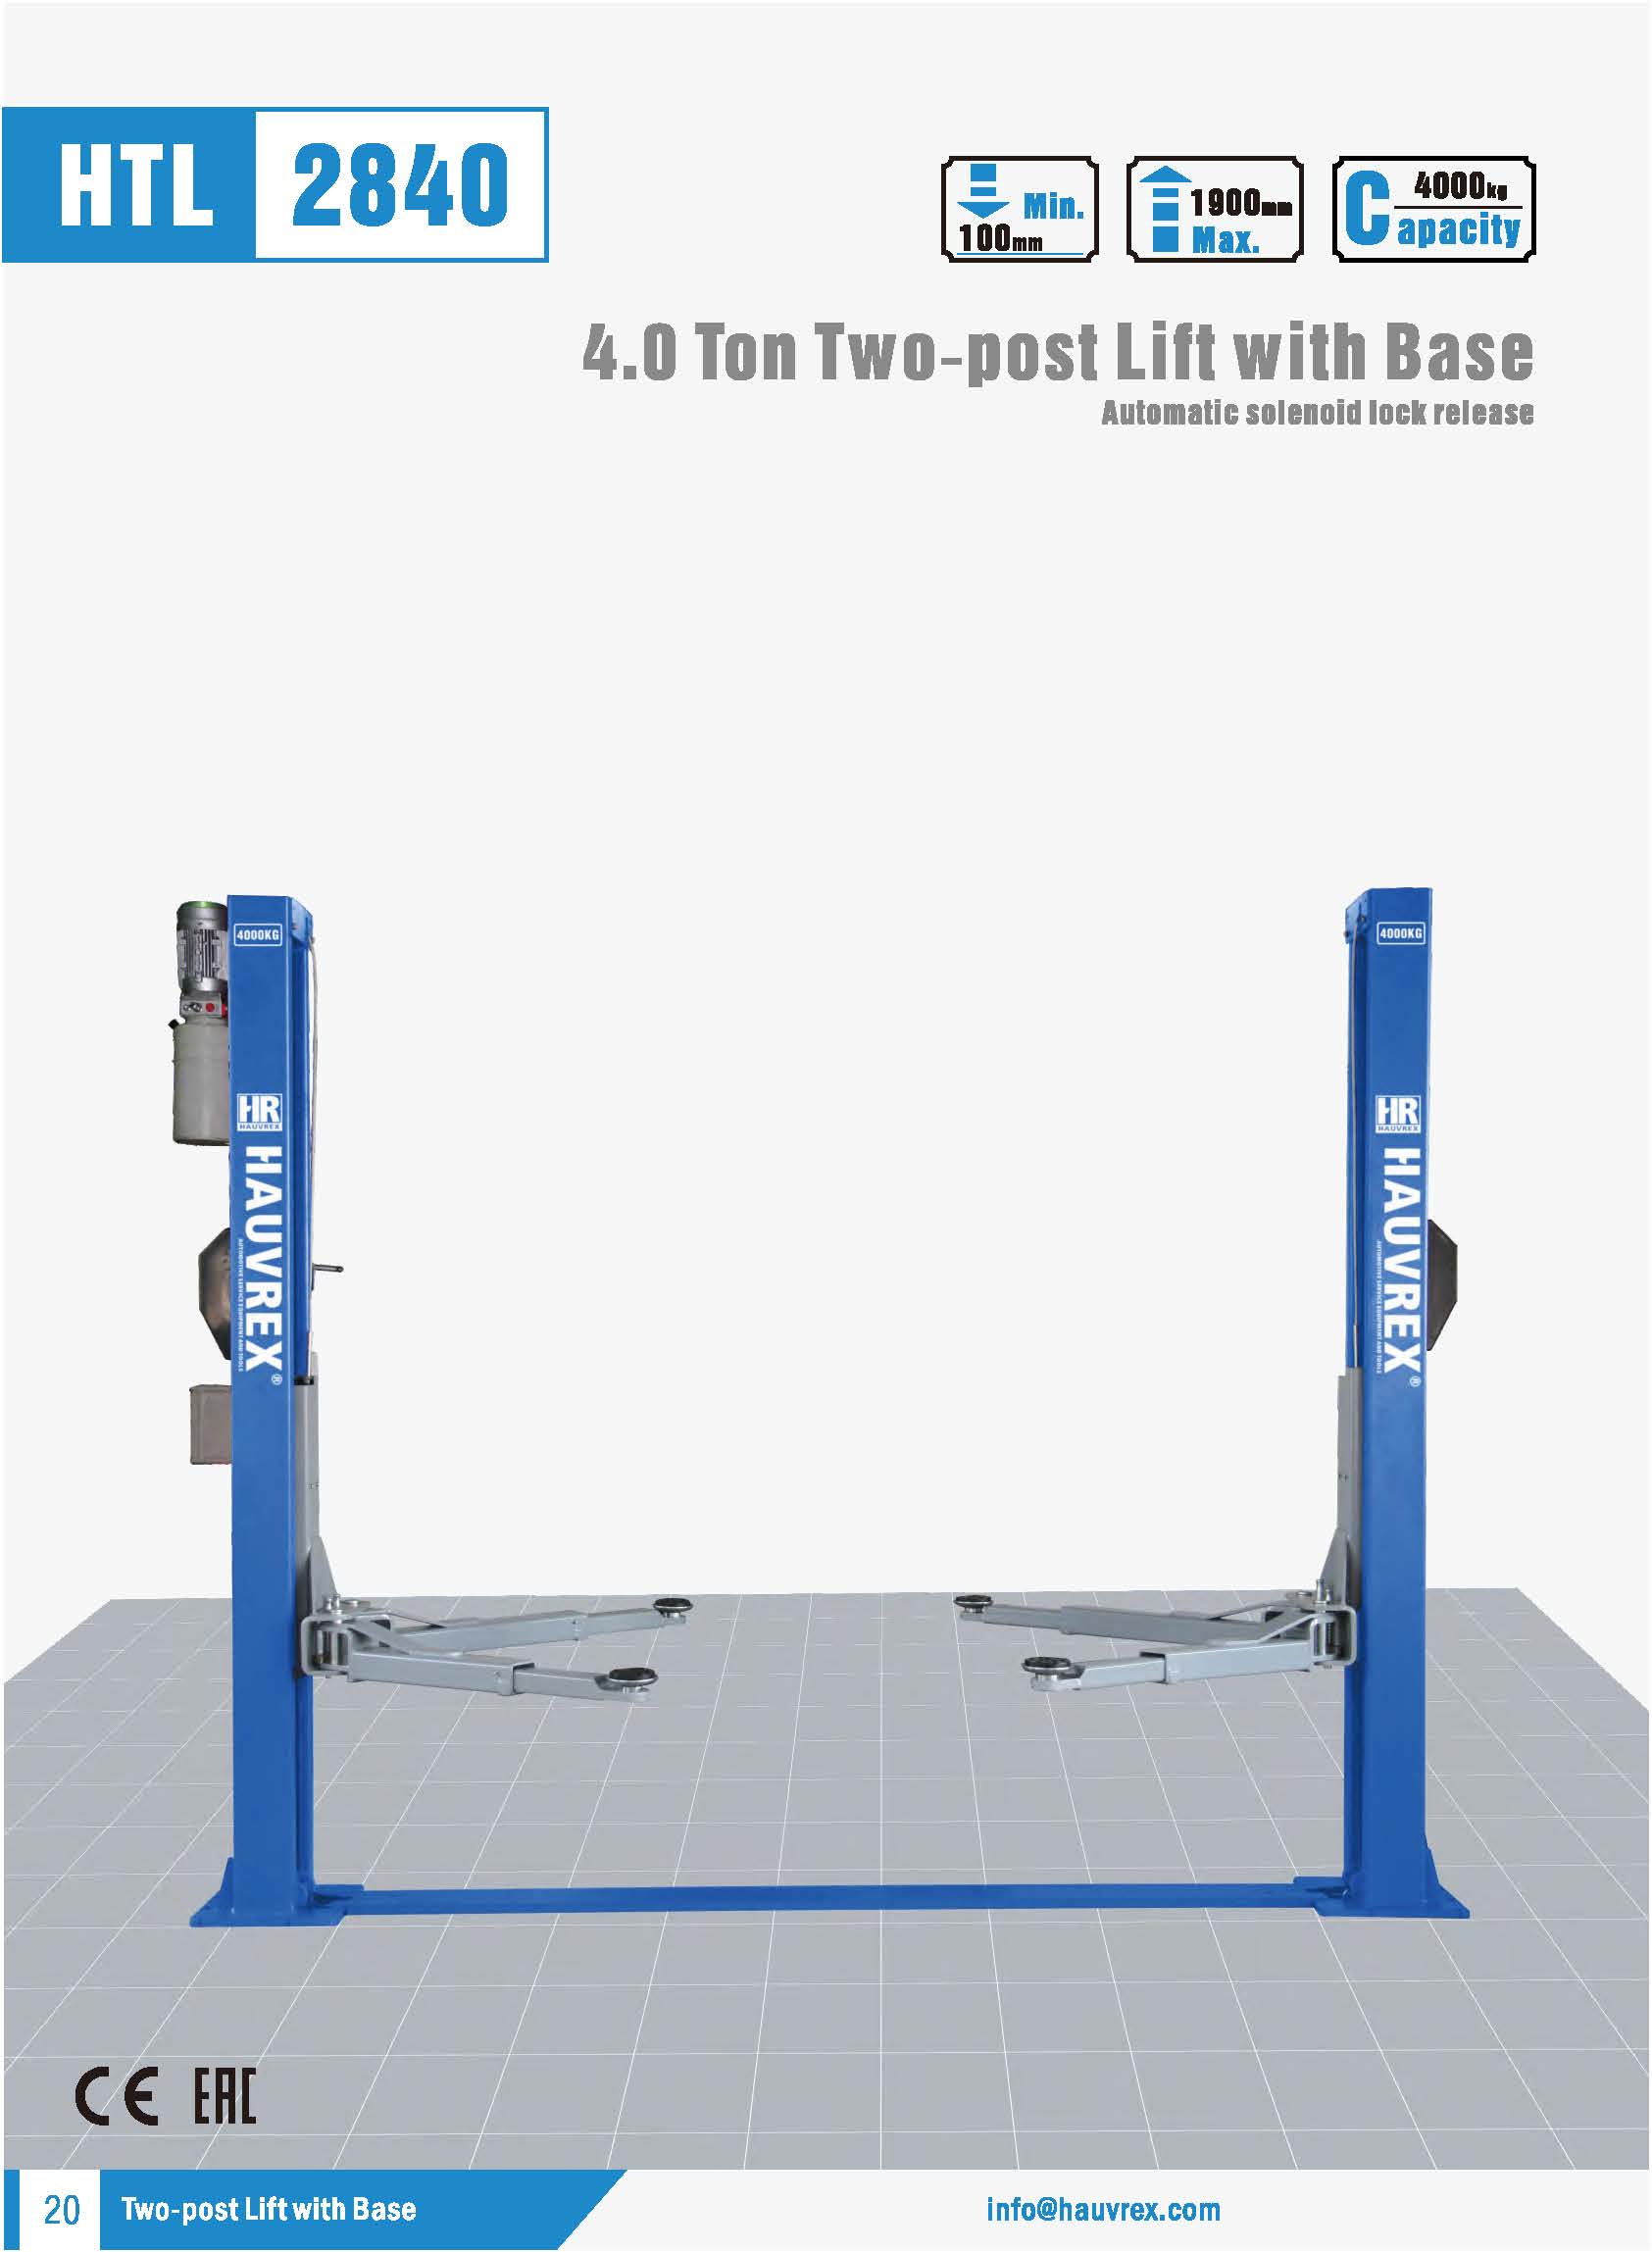 HTL2840 Two-post Lift